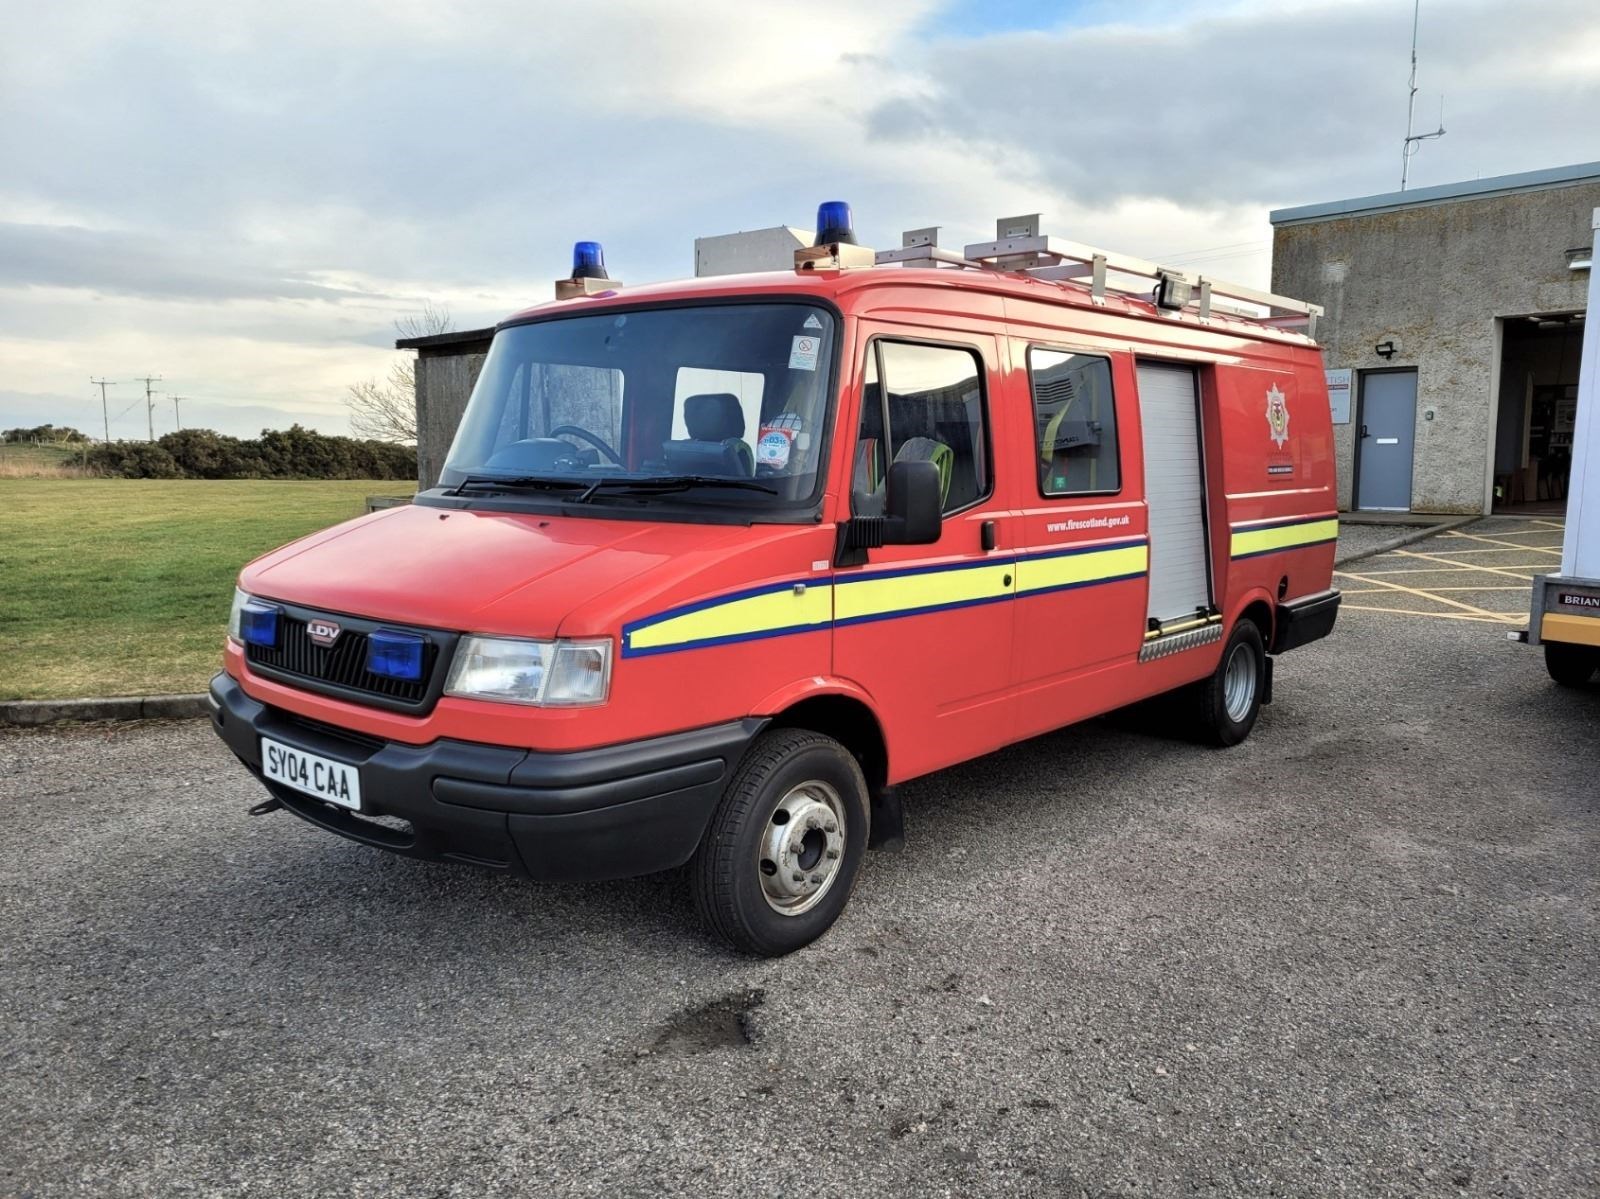 Balintore's vehicle has sparked Trumpton Fire Station comparisons.